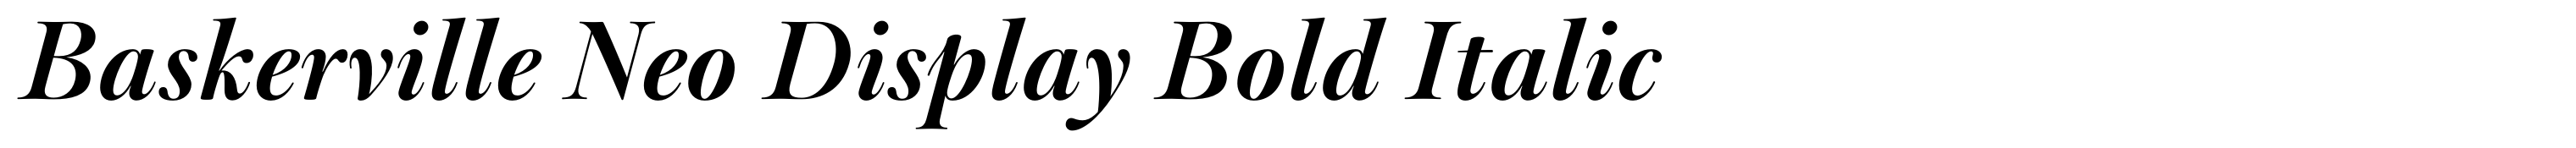 Baskerville Neo Display Bold Italic